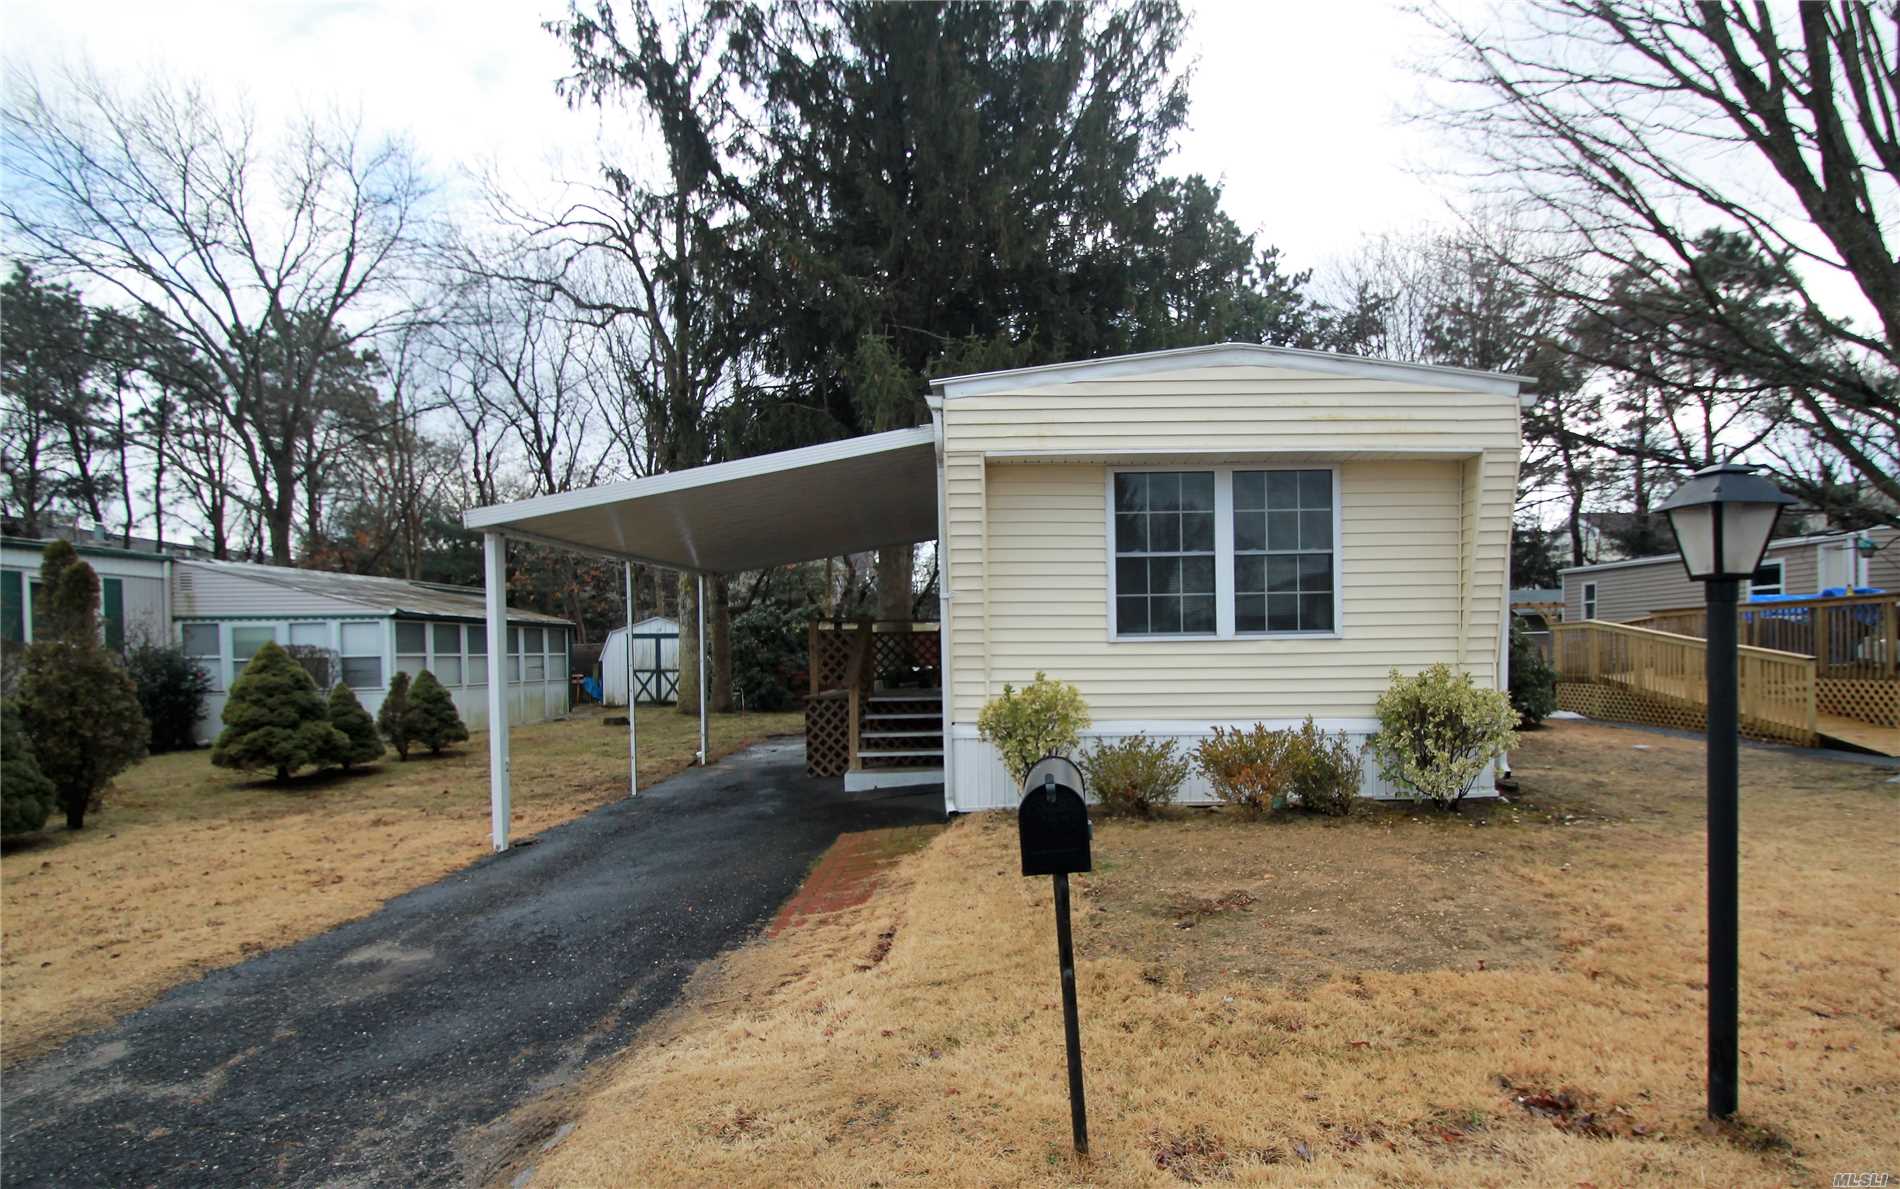 Bright, Inviting And Move-In Ready. New Roof, Insulation, Siding, Skirting In 2017. New Hw Heater In 2018. Separate 10Ft. X 15Ft. Secure Shed With Power. Enclosed Patio. All Furnishings And Household Items Included. Park Hoa (Appx $980/Month) Includes Lot Rental, Sewer, Water, Garbage Pickup, Street Snowplowing. Buyers Must Qualify For Park Residency With Good Credit Score And Income Verification Proving $3000/Mo. Income After Other Obligations. Nys Star Rebate Available To Resident Owners.